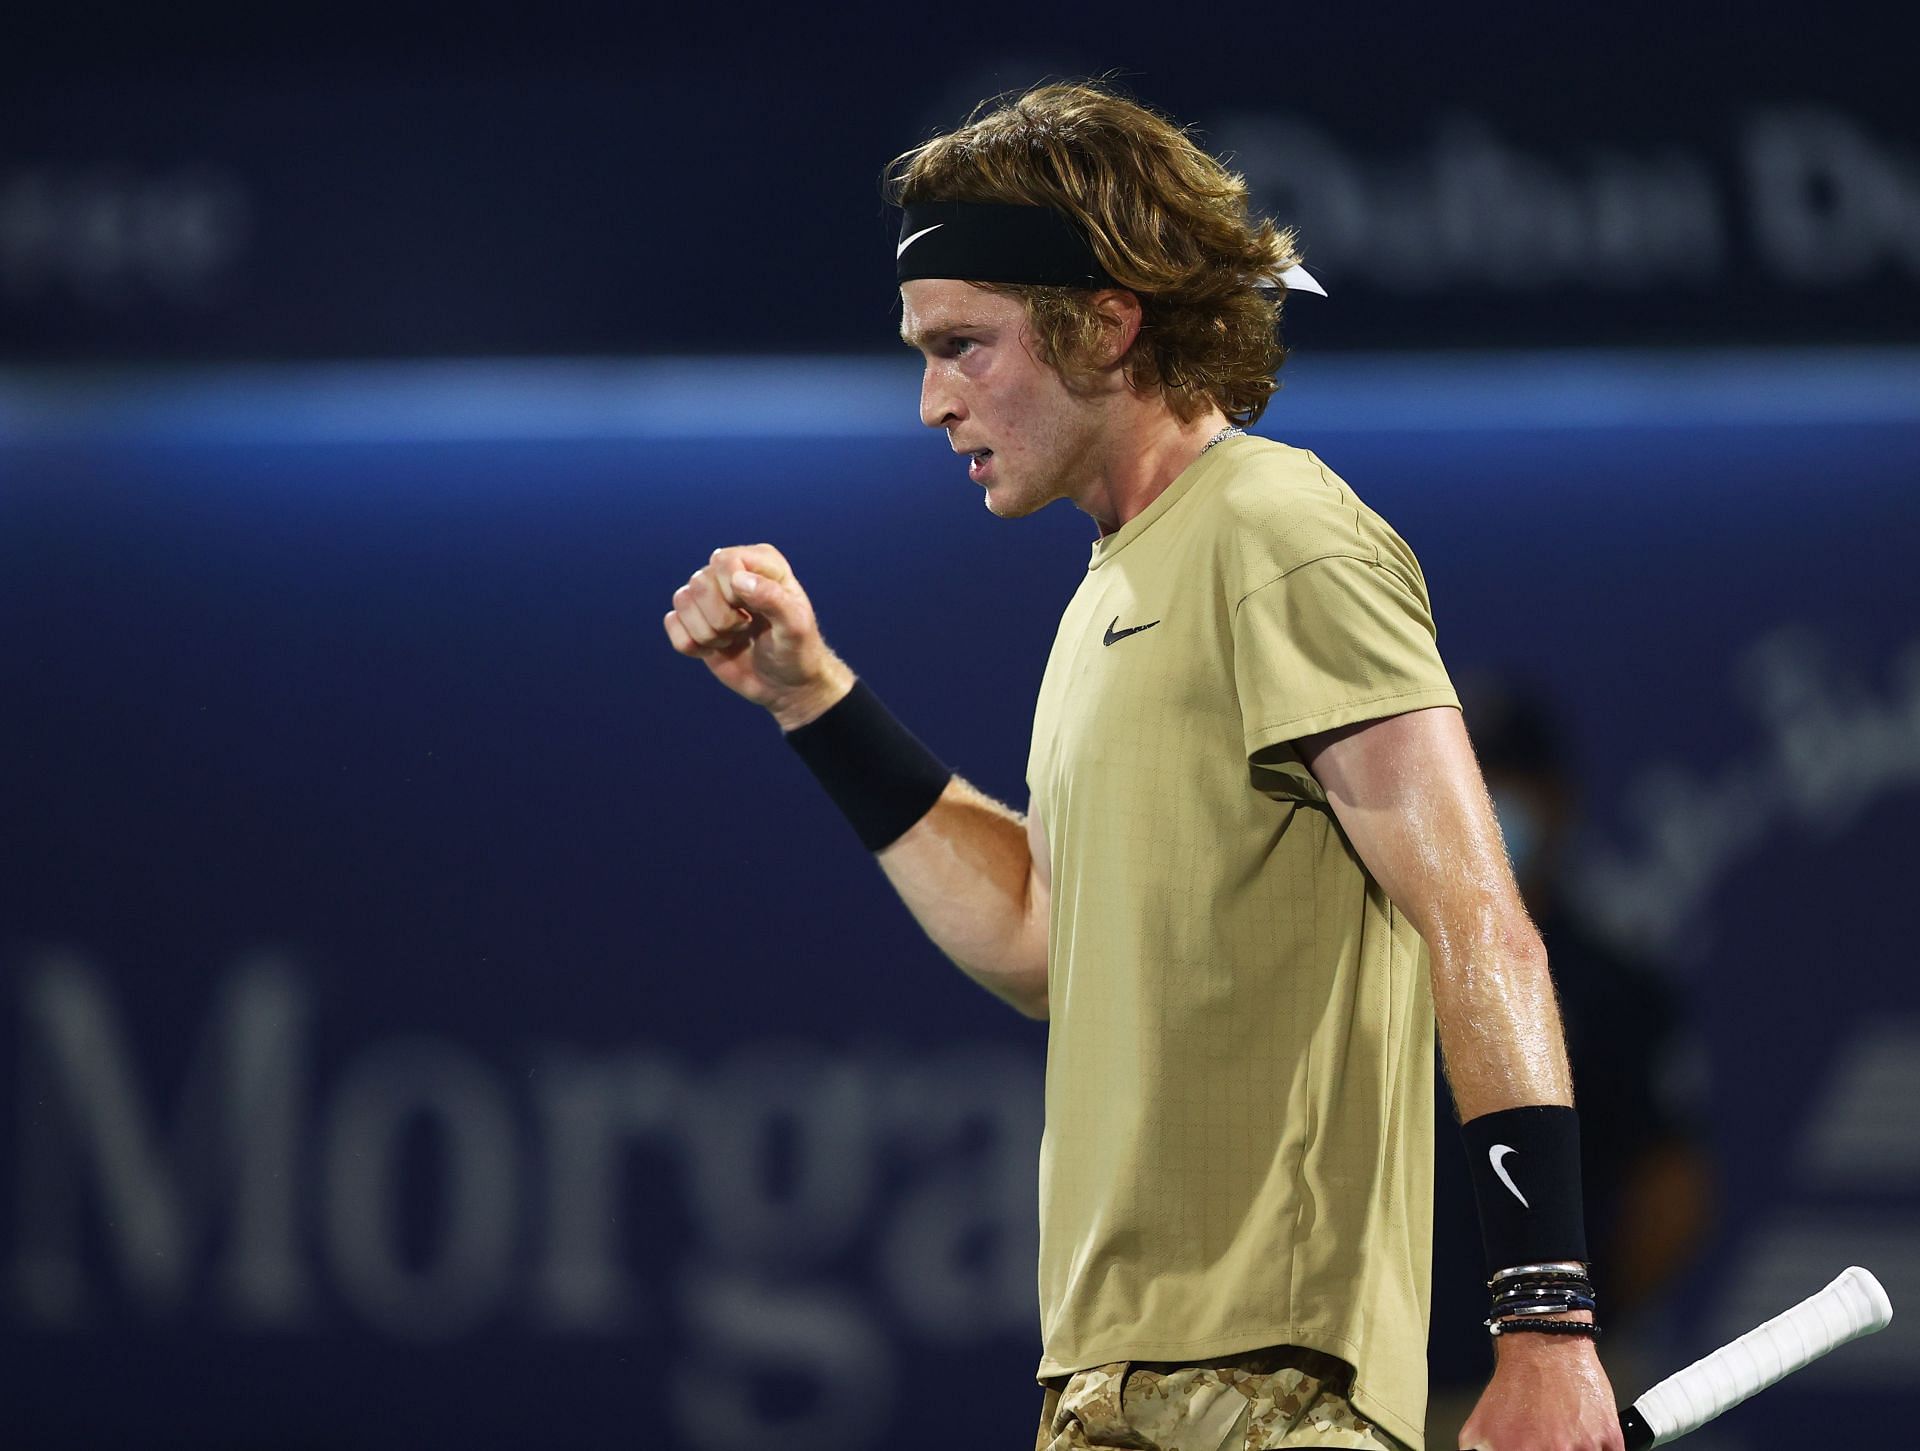 Andrey Rublev in action against Taylor Fritz at the 2021 Dubai Tennis Championships